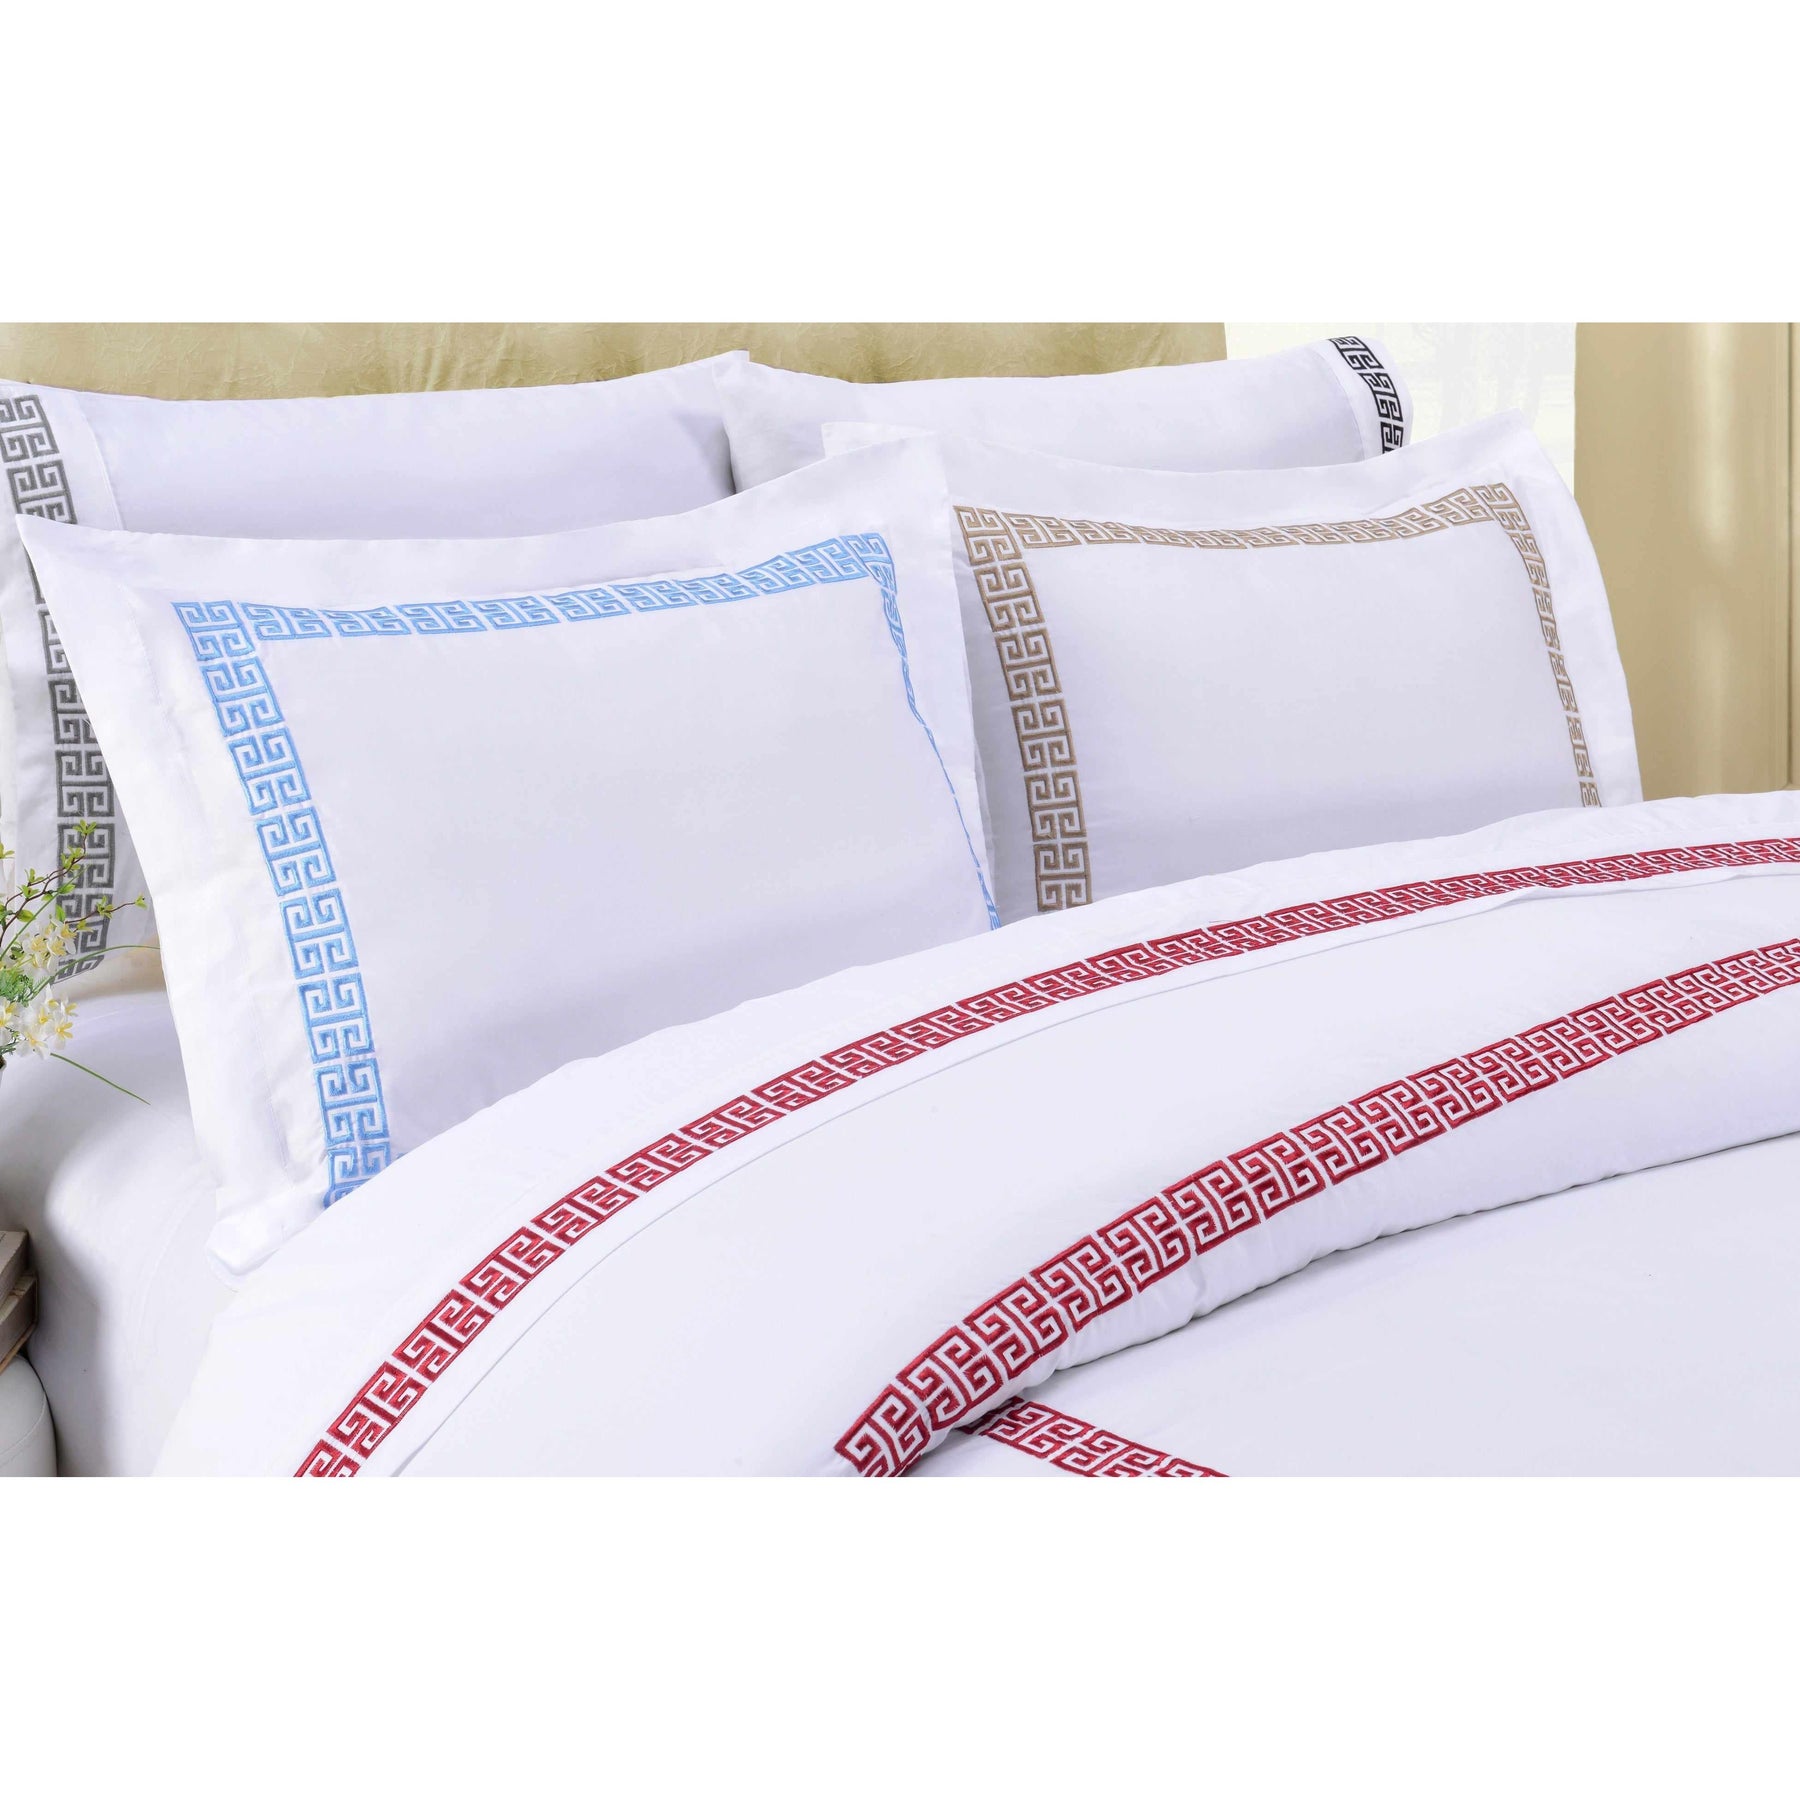  Superior Classic 200 thread Count Kendell Embroidered Cotton Deep Pocket Sheets - White/Black